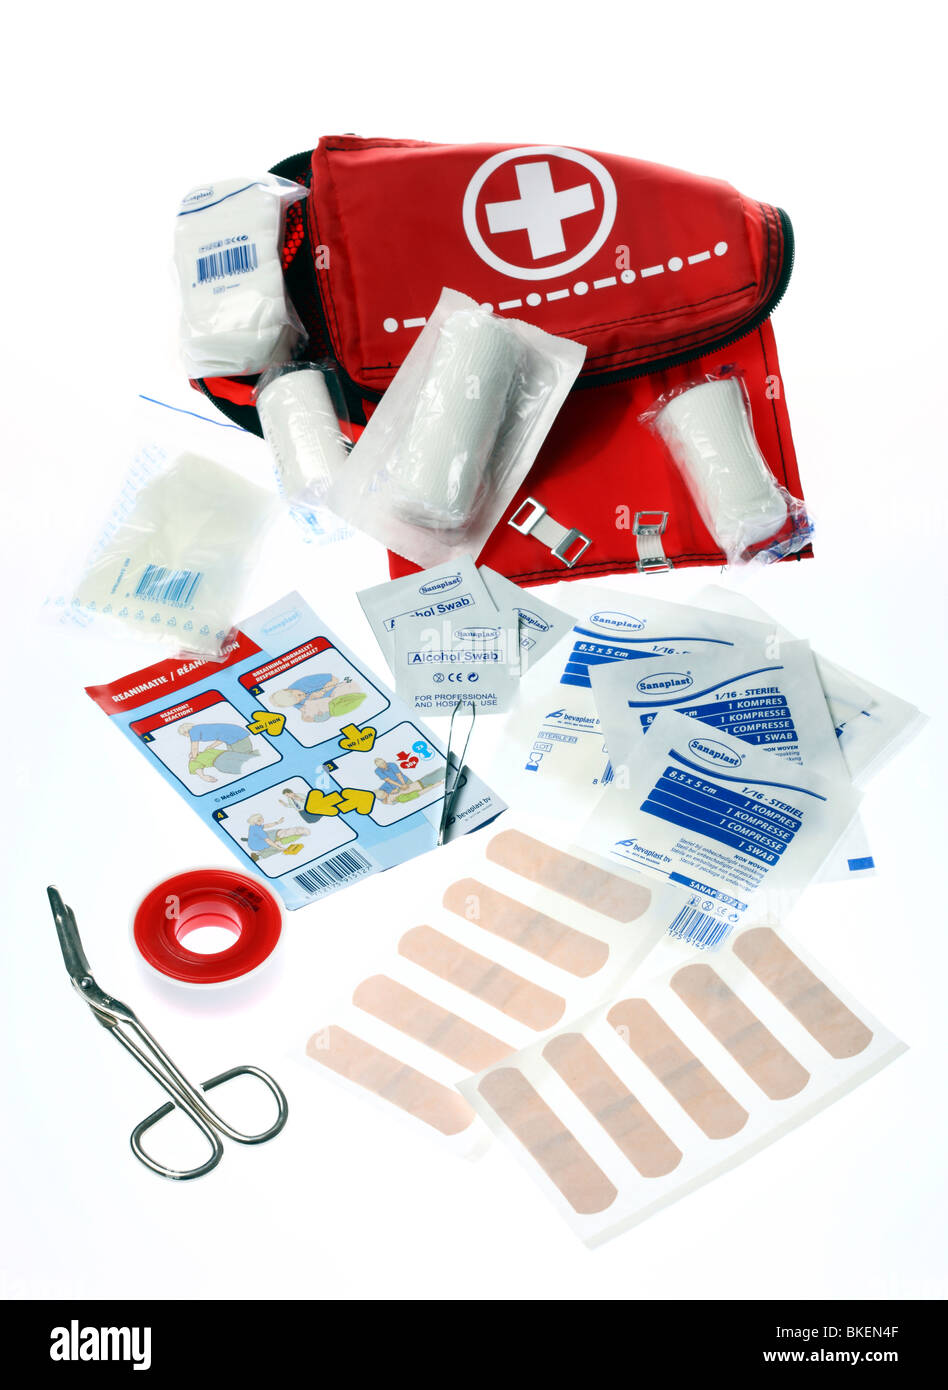 https://c8.alamy.com/comp/BKEN4F/first-aid-box-for-traveling-medical-help-for-outdoors-BKEN4F.jpg